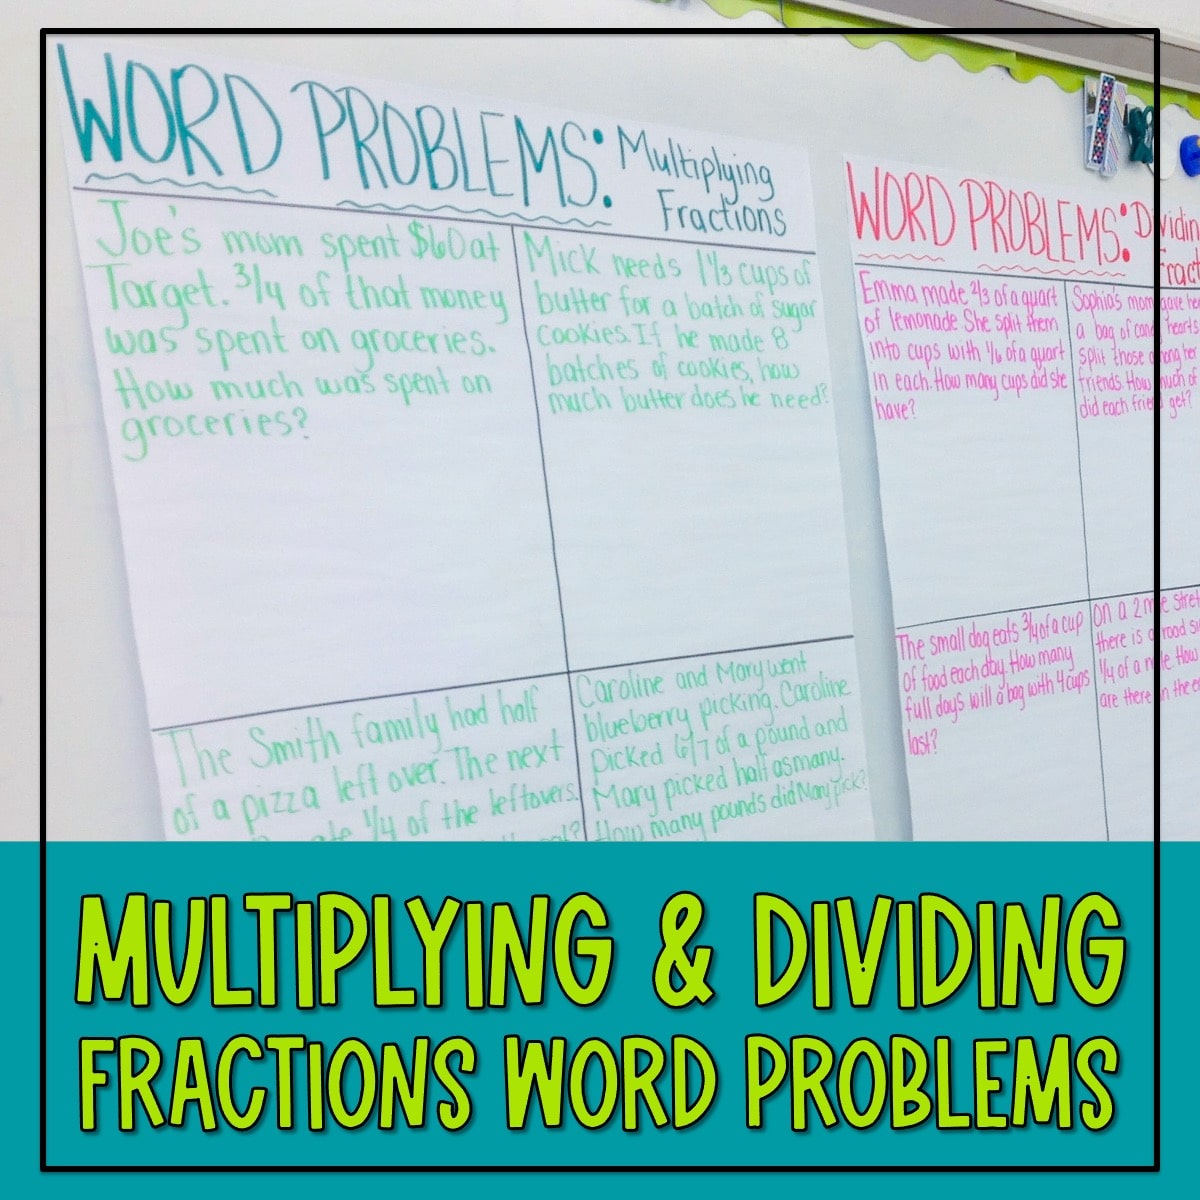 This post includes anchor charts and practice activities for multiplying and dividing fractions word problems in upper elementary.